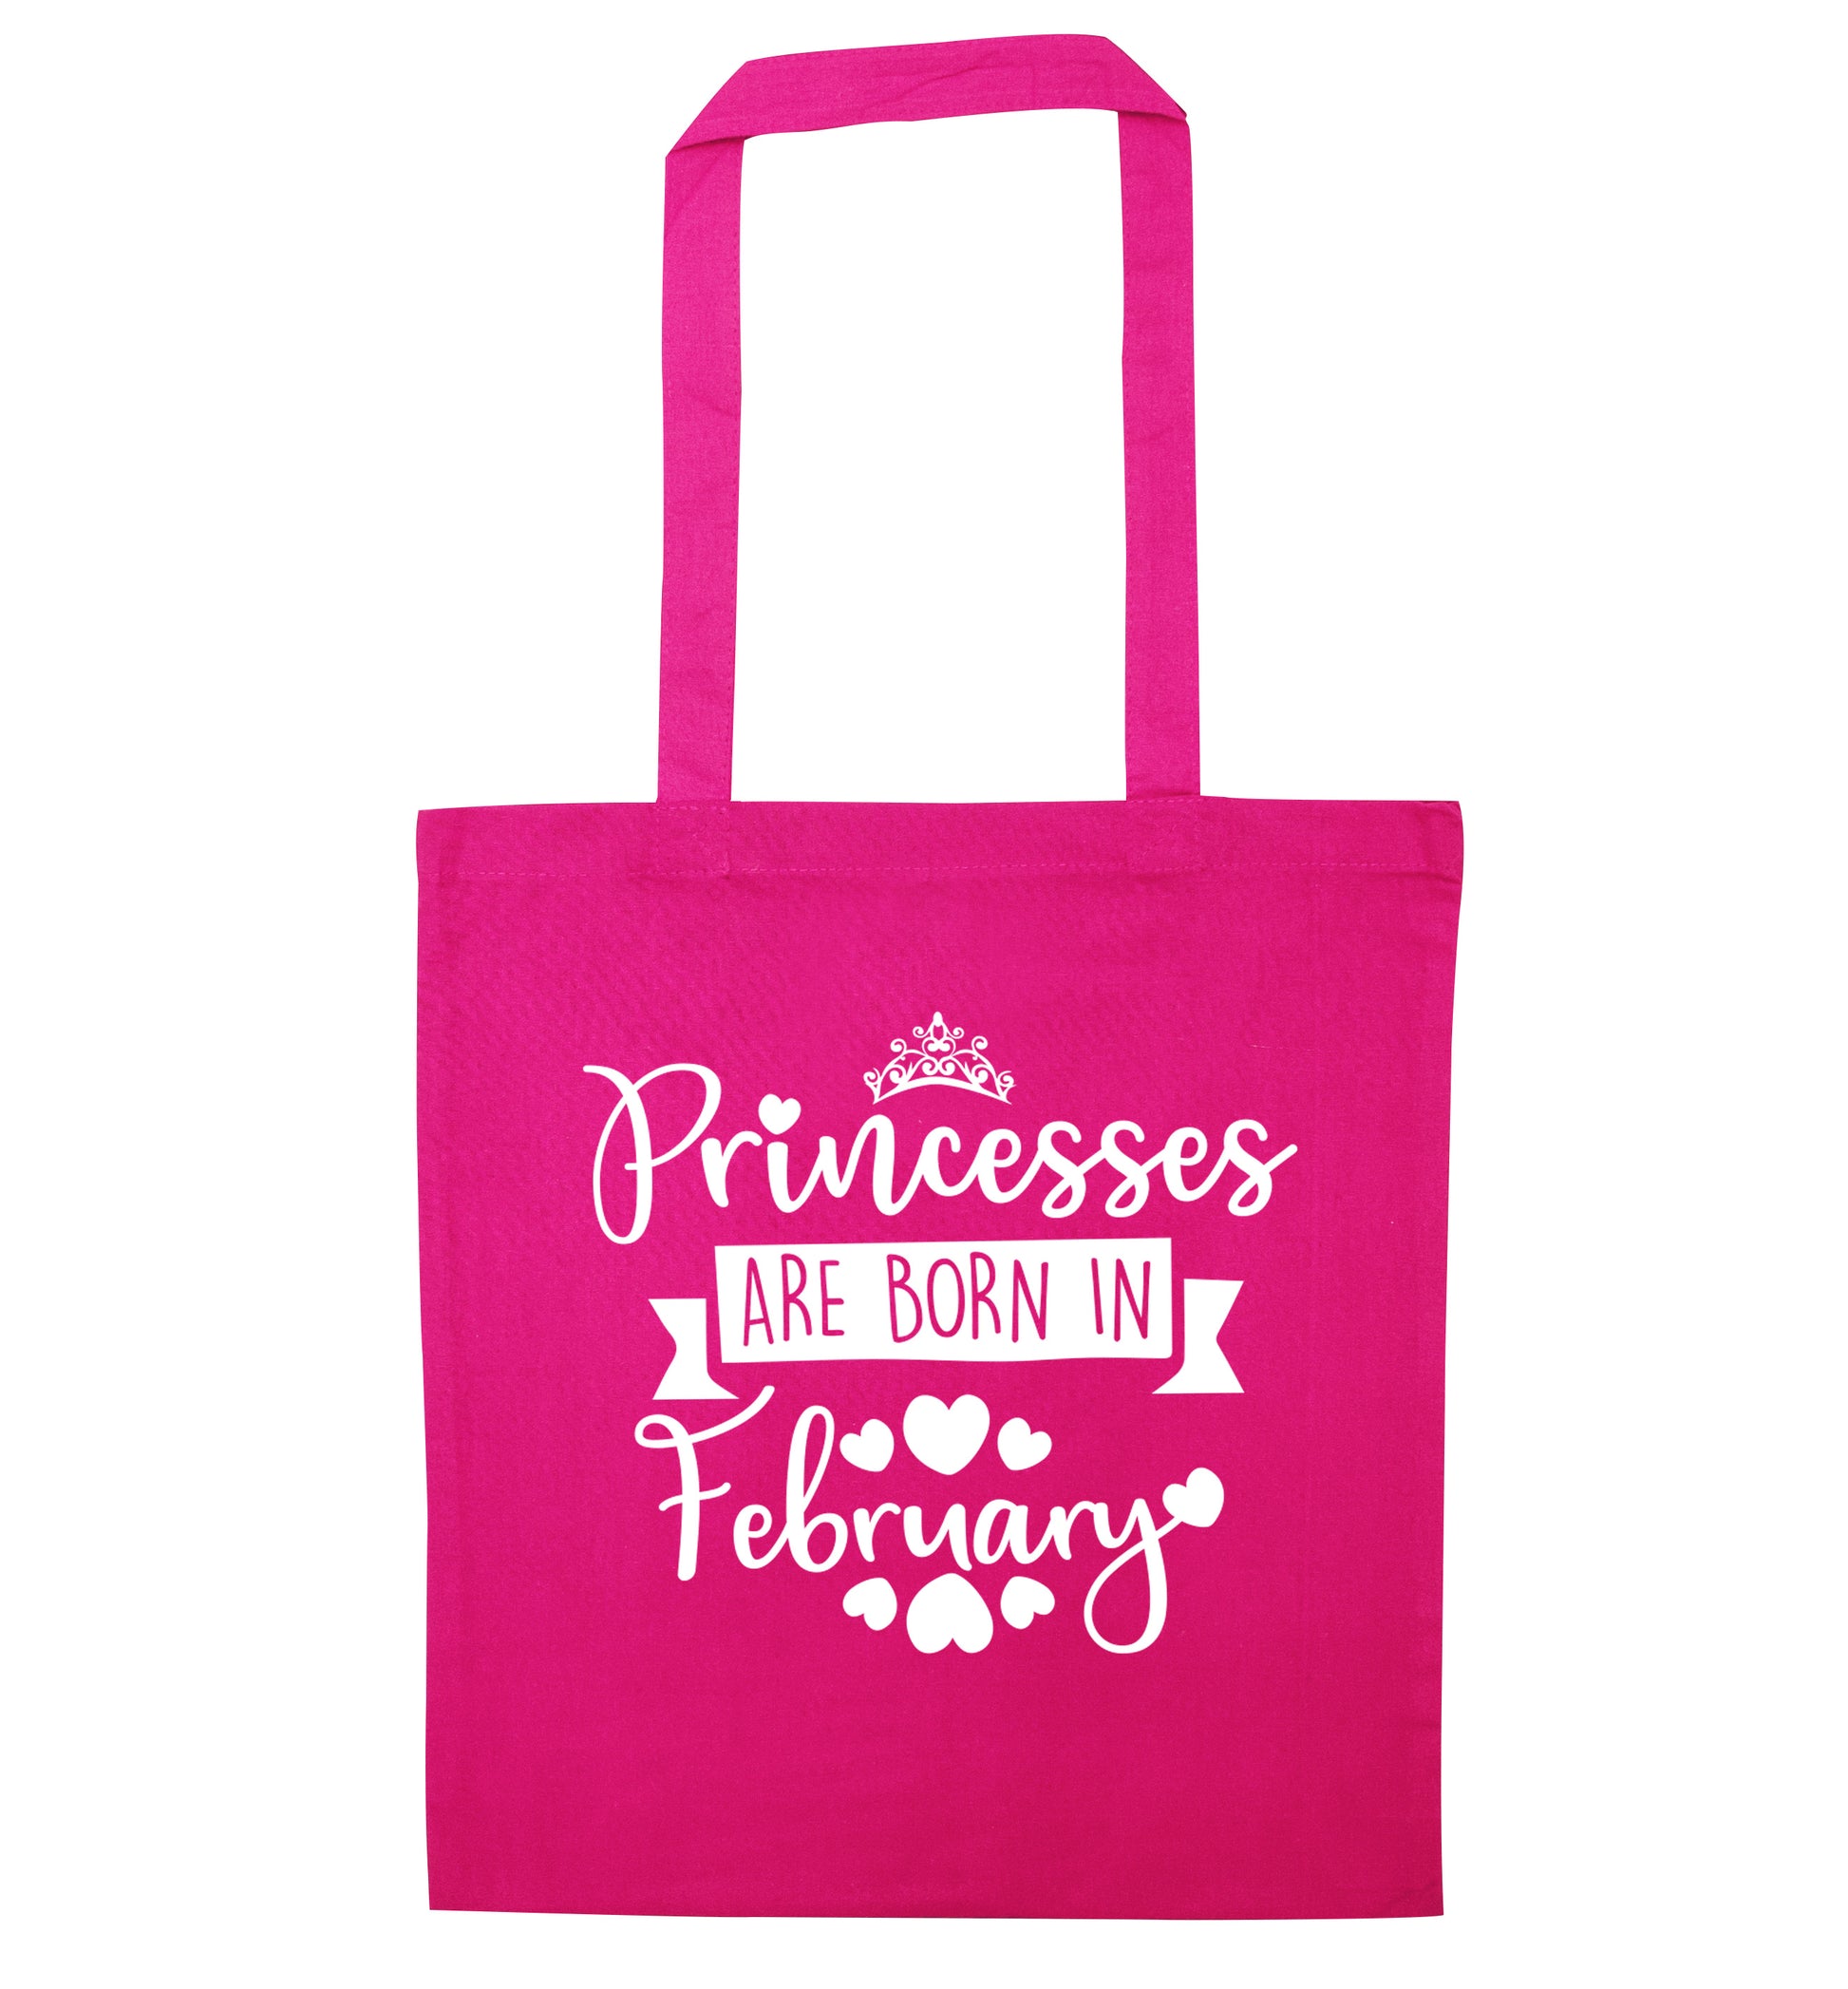 Princesses are born in February pink tote bag